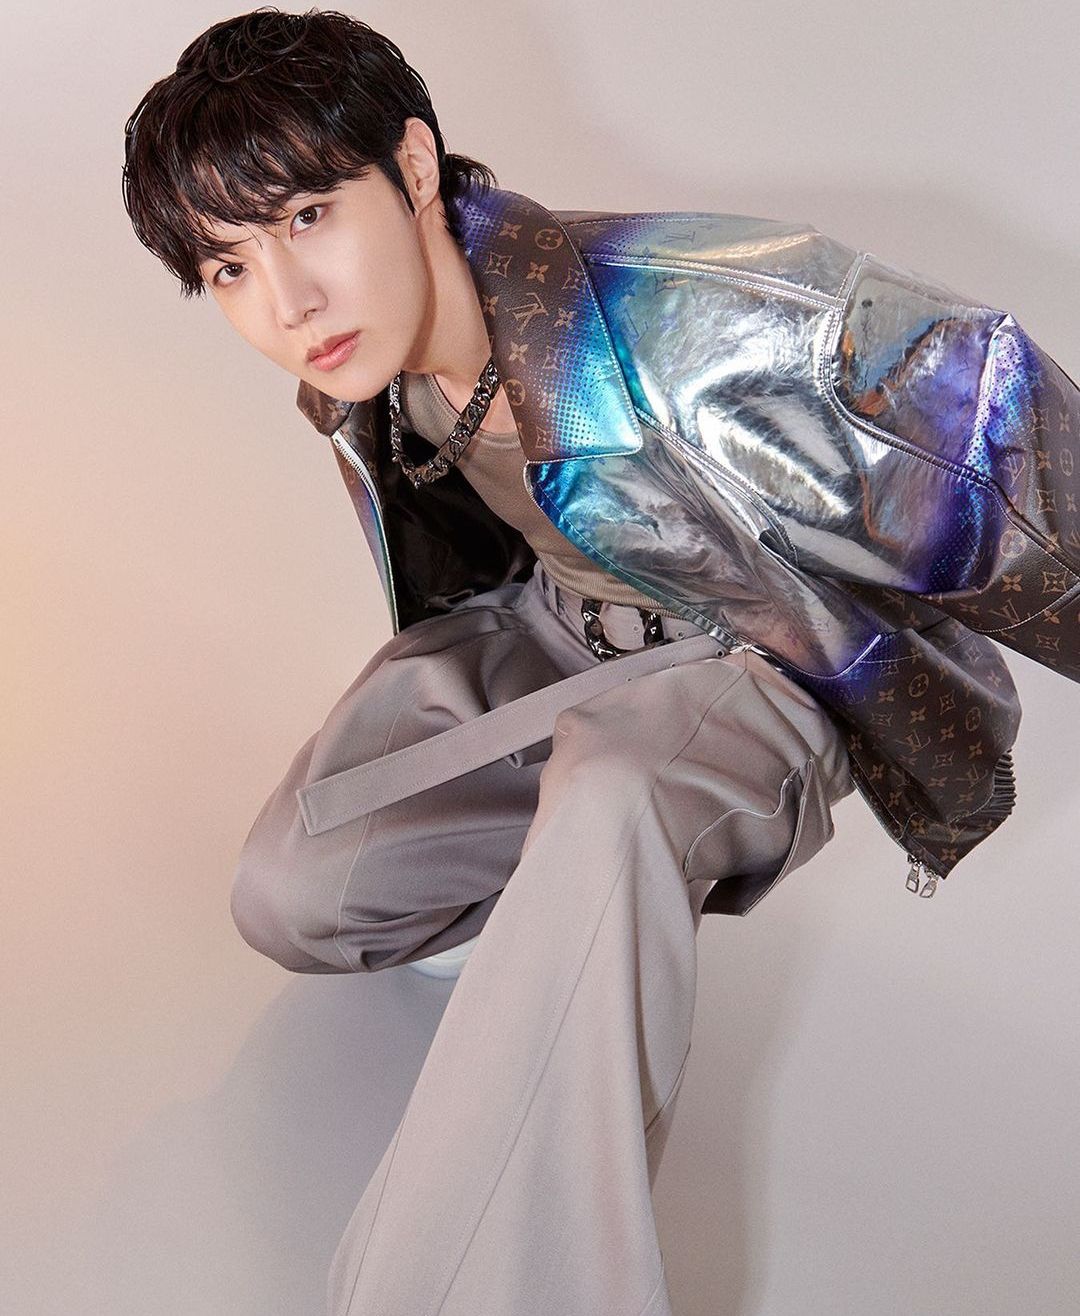 theqoo] LOUIS VUITTON'S AMBASSADOR J-HOPE'S FIRST CAMPAIGN REVEAL